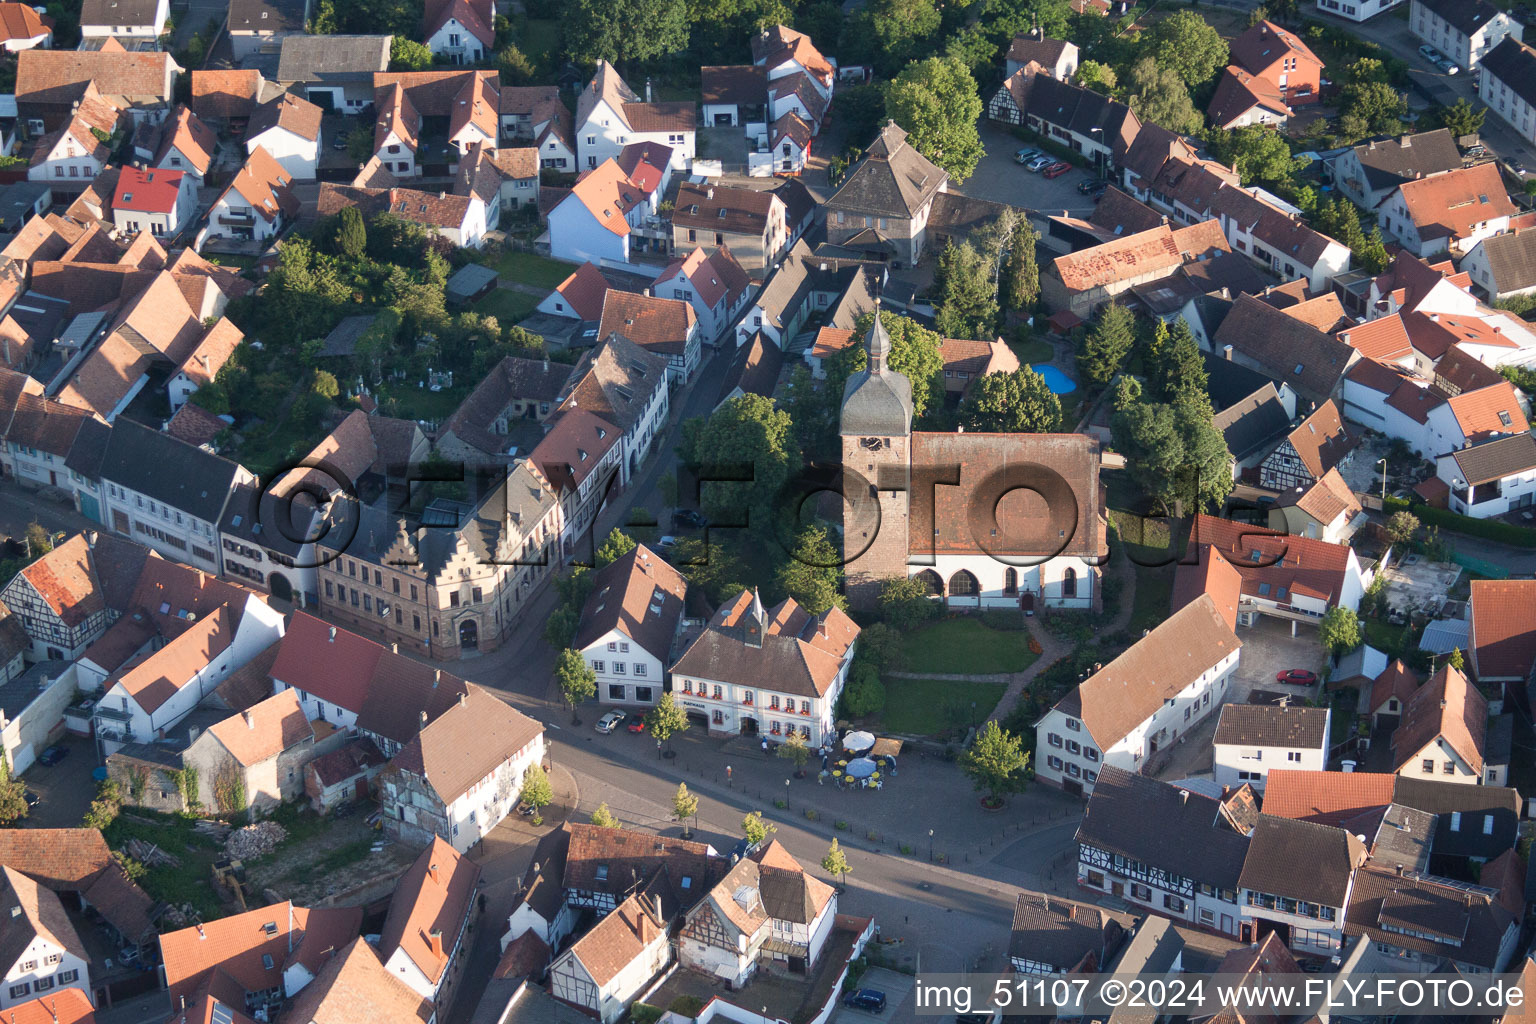 Oblique view of Town View of the streets and houses of the residential areas in the district Billigheim in Billigheim-Ingenheim in the state Rhineland-Palatinate